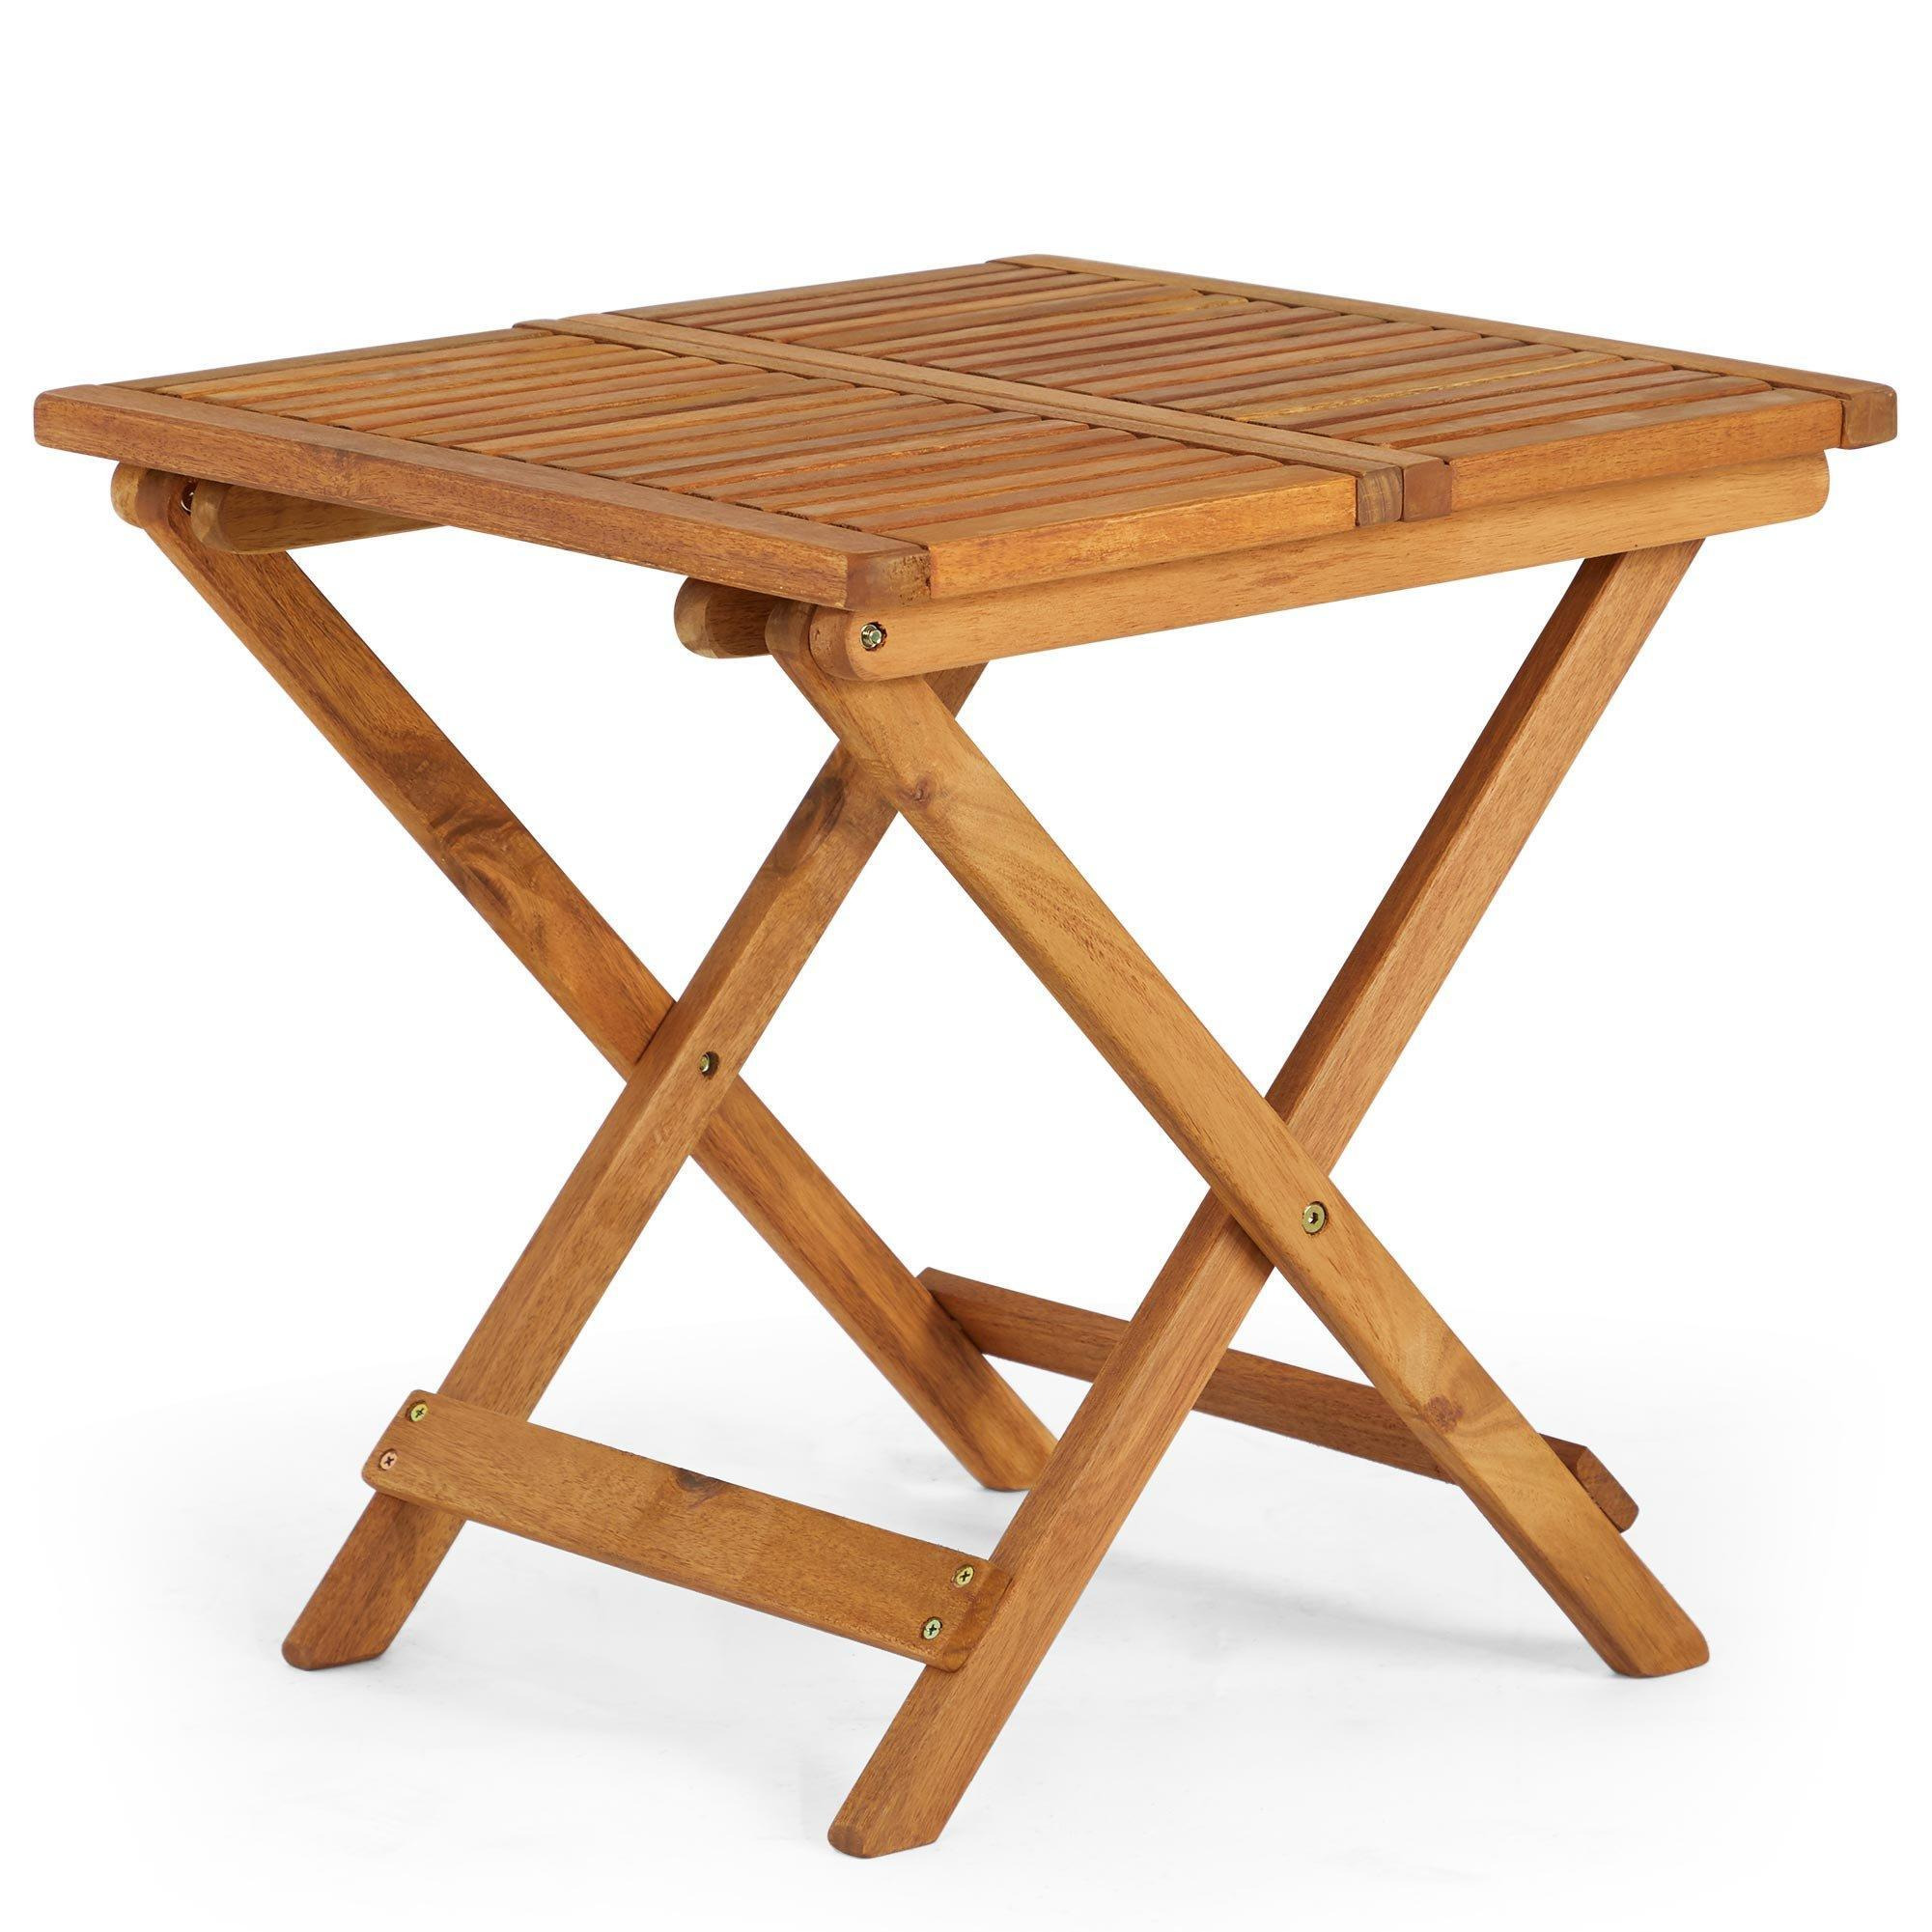 Adirondack Folding Garden and Outdoor Side Table - image 1